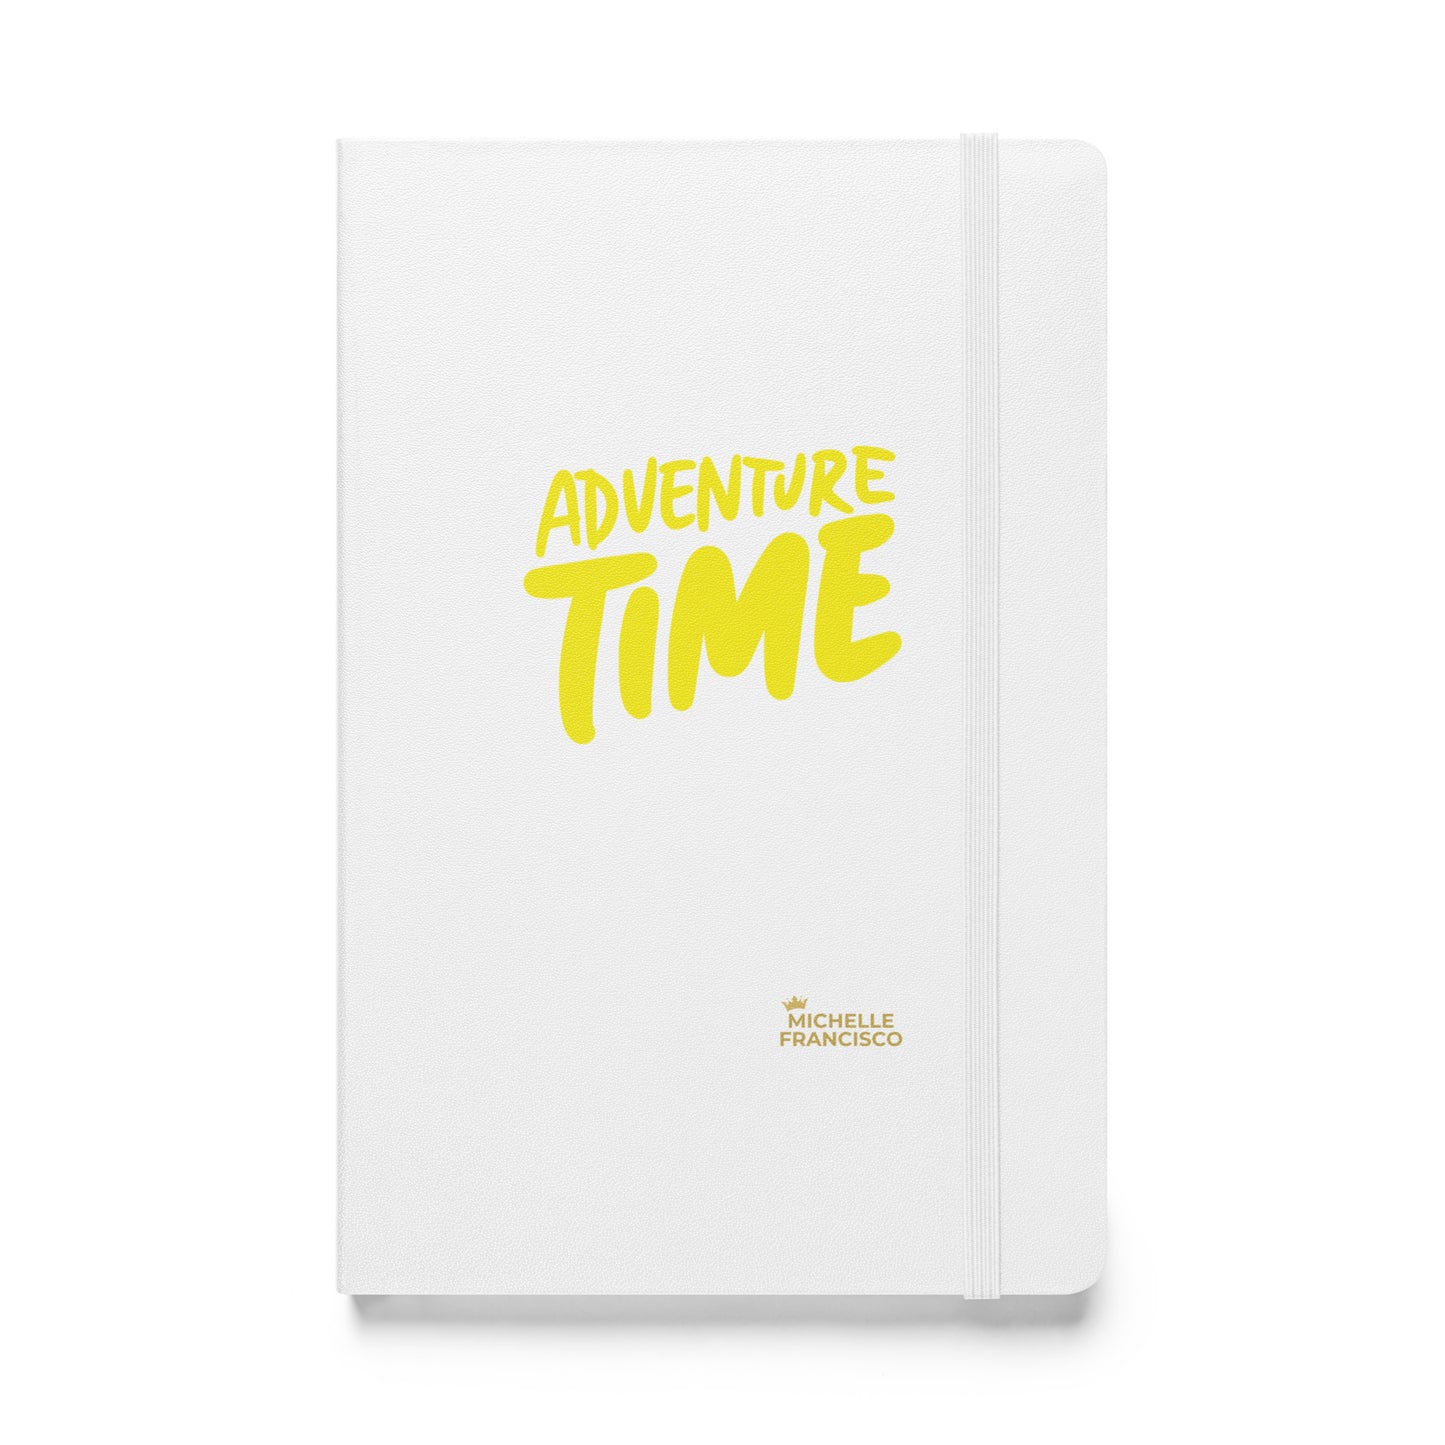 Adventure Time Hardcover Bound Notebook